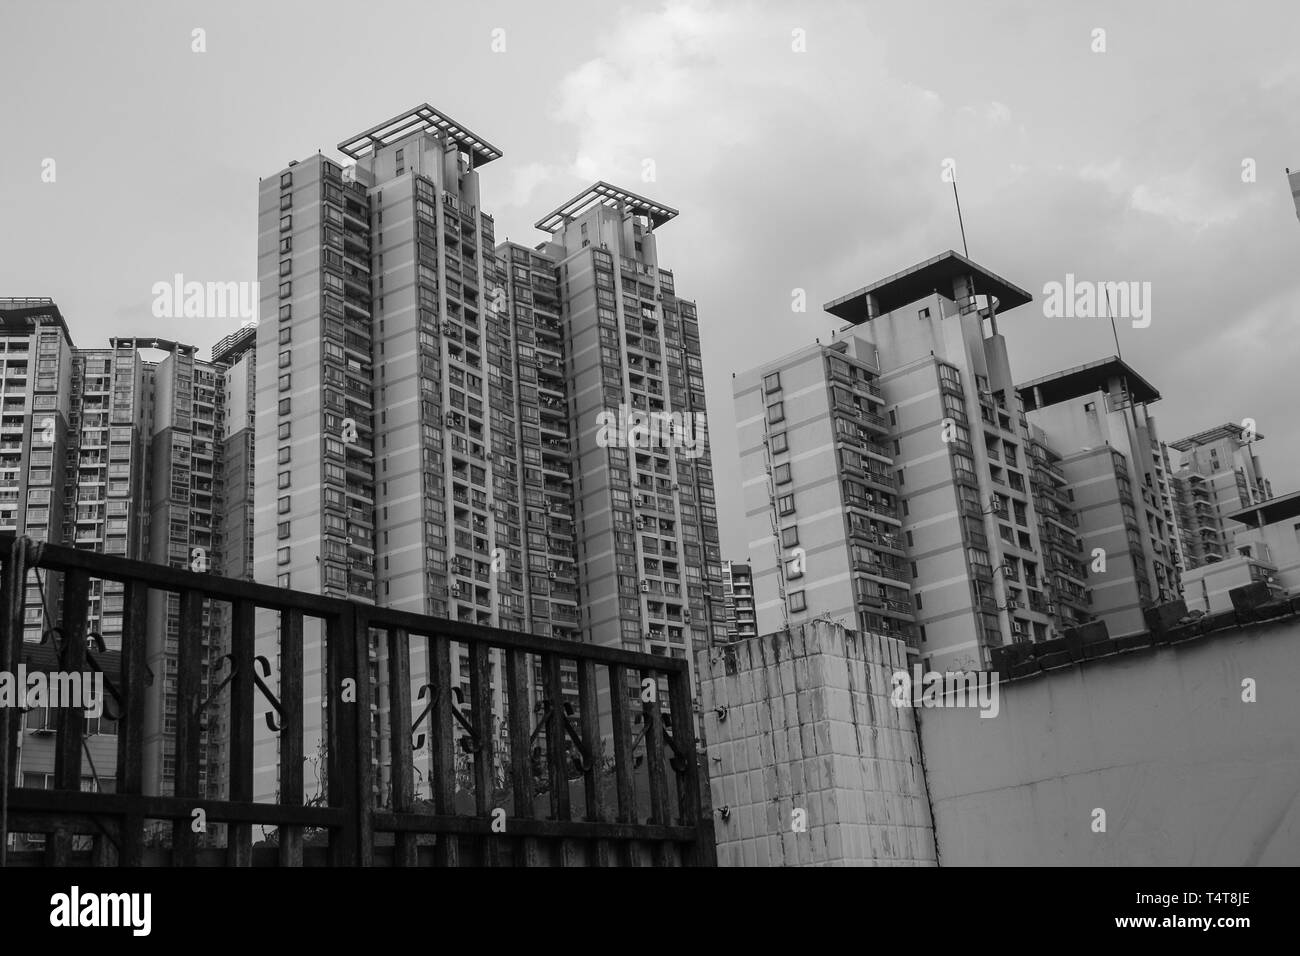 Black and white view on a district with numerous apartment towers in Tianjin, China Stock Photo